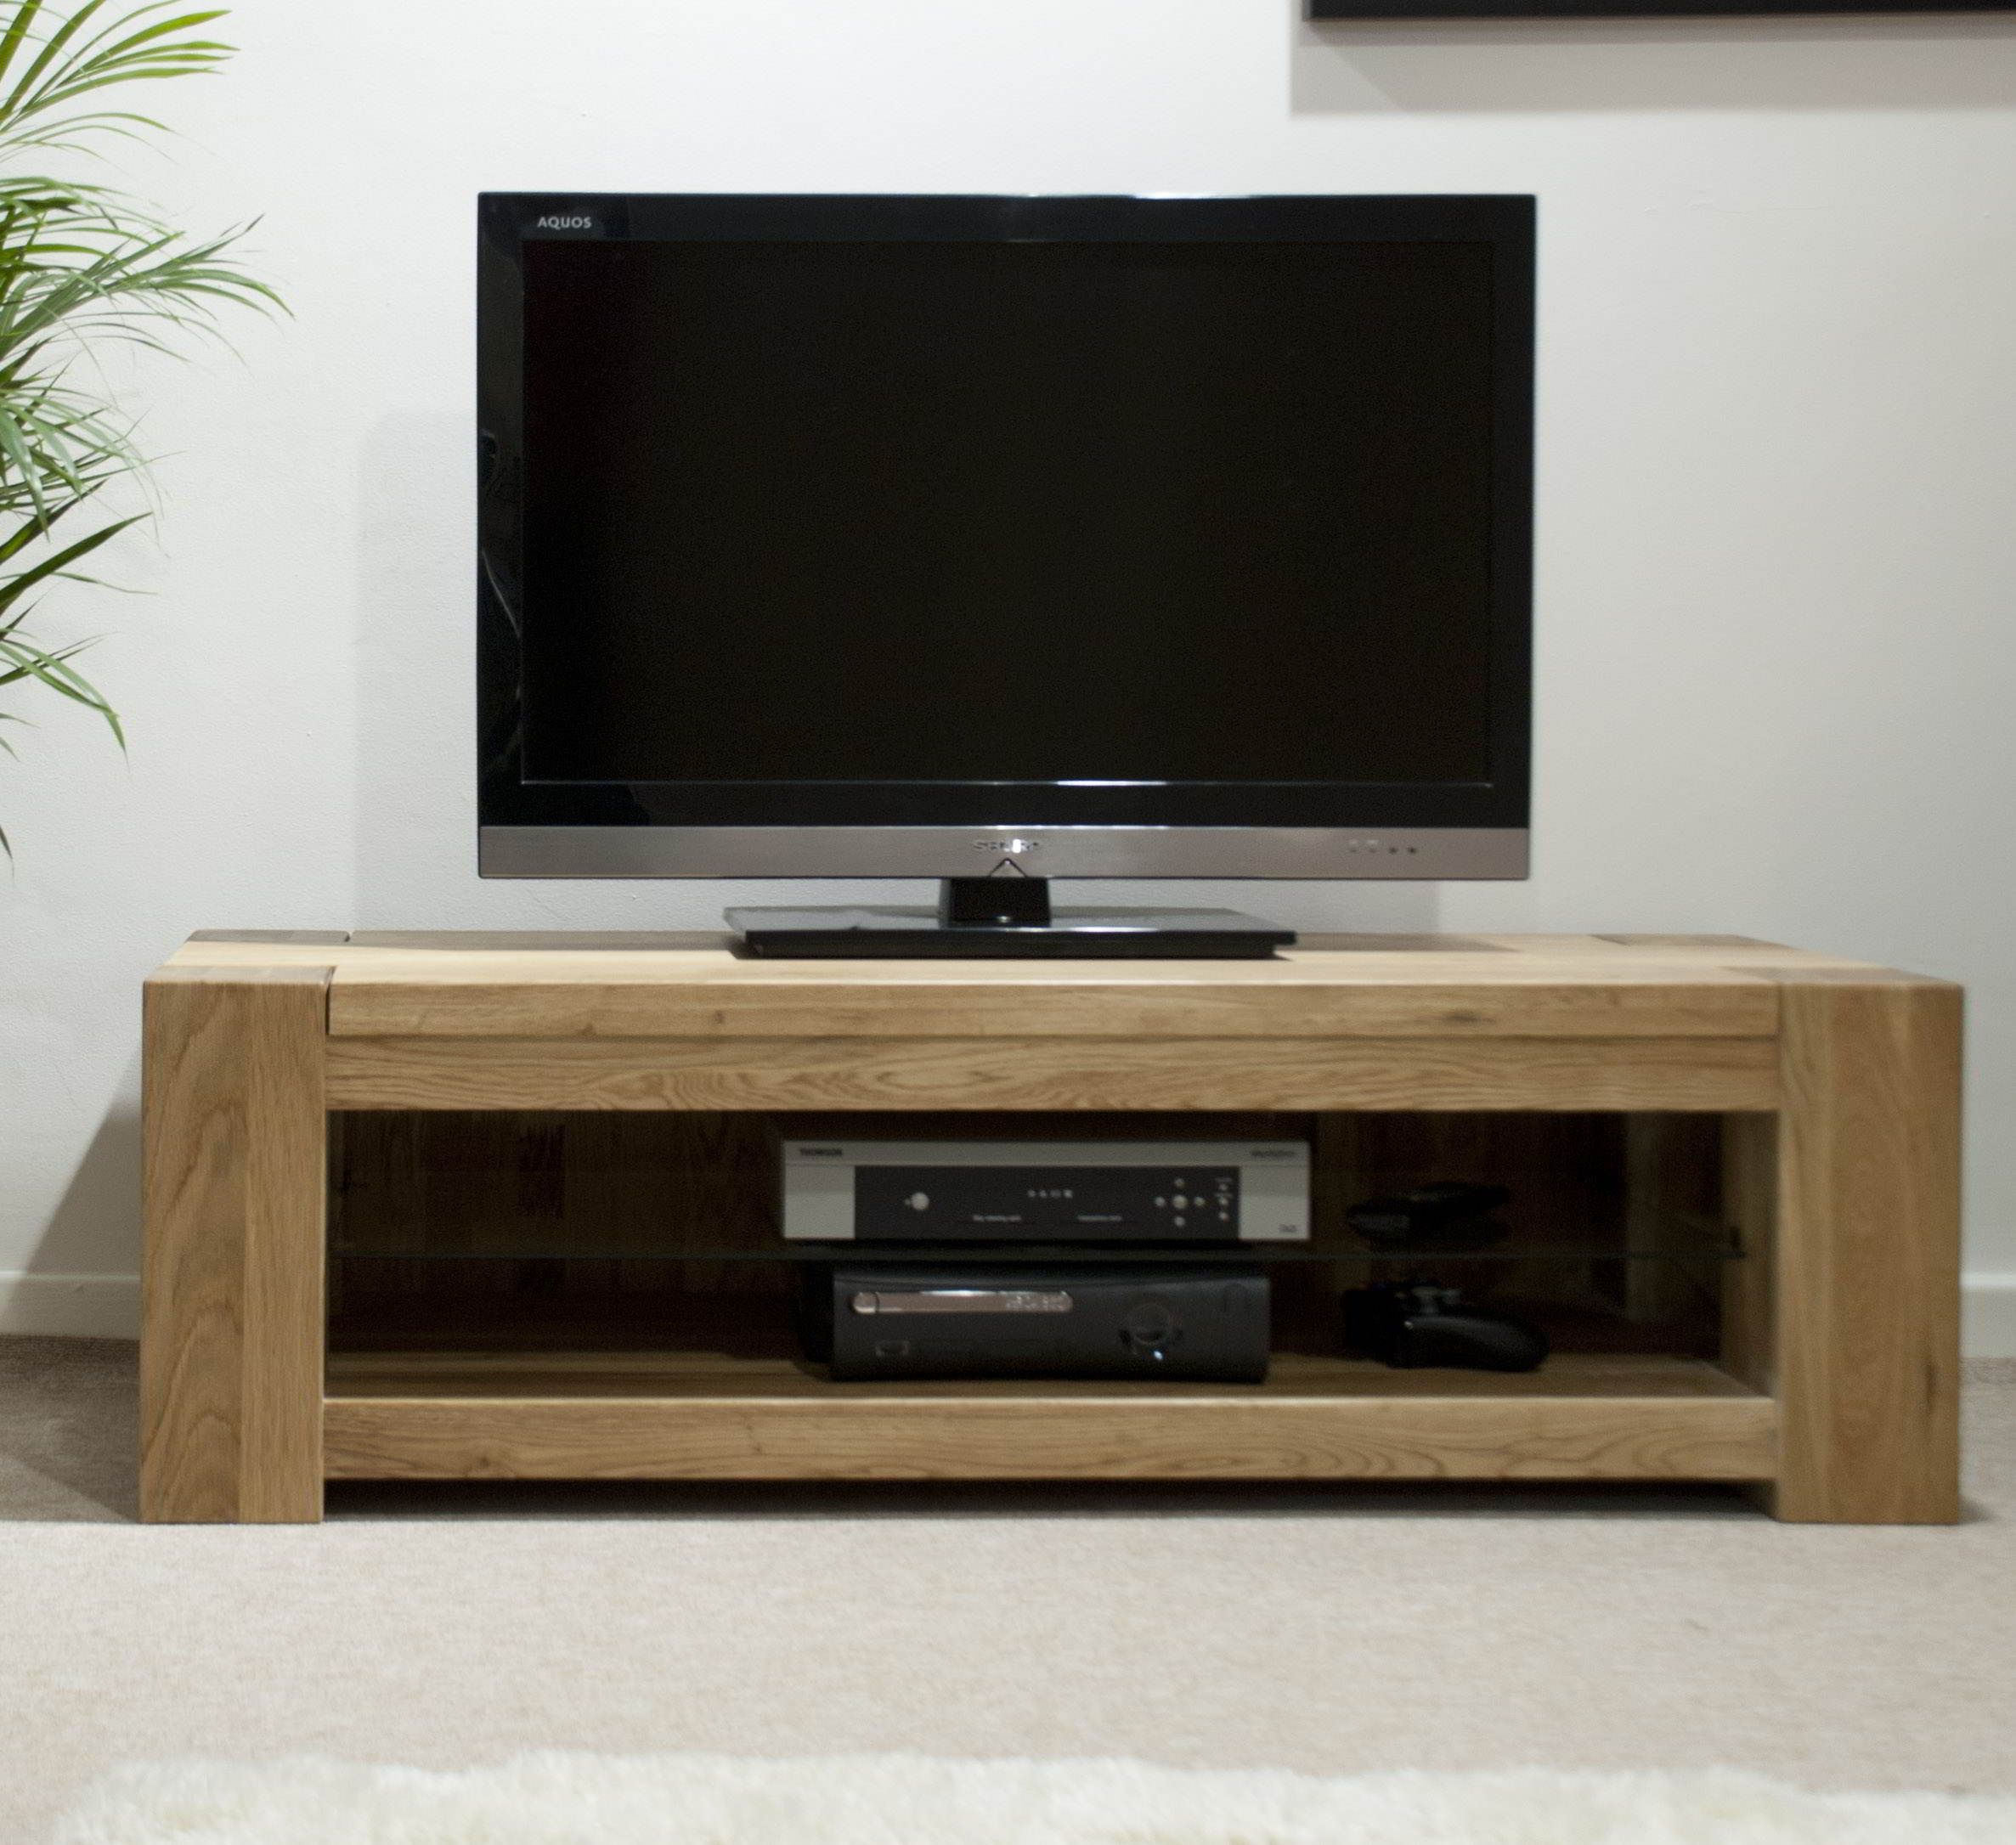 Padova Solid Oak Furniture Plasma Television Cabinet Stand Within Oak Furniture Tv Stands (Photo 2 of 15)